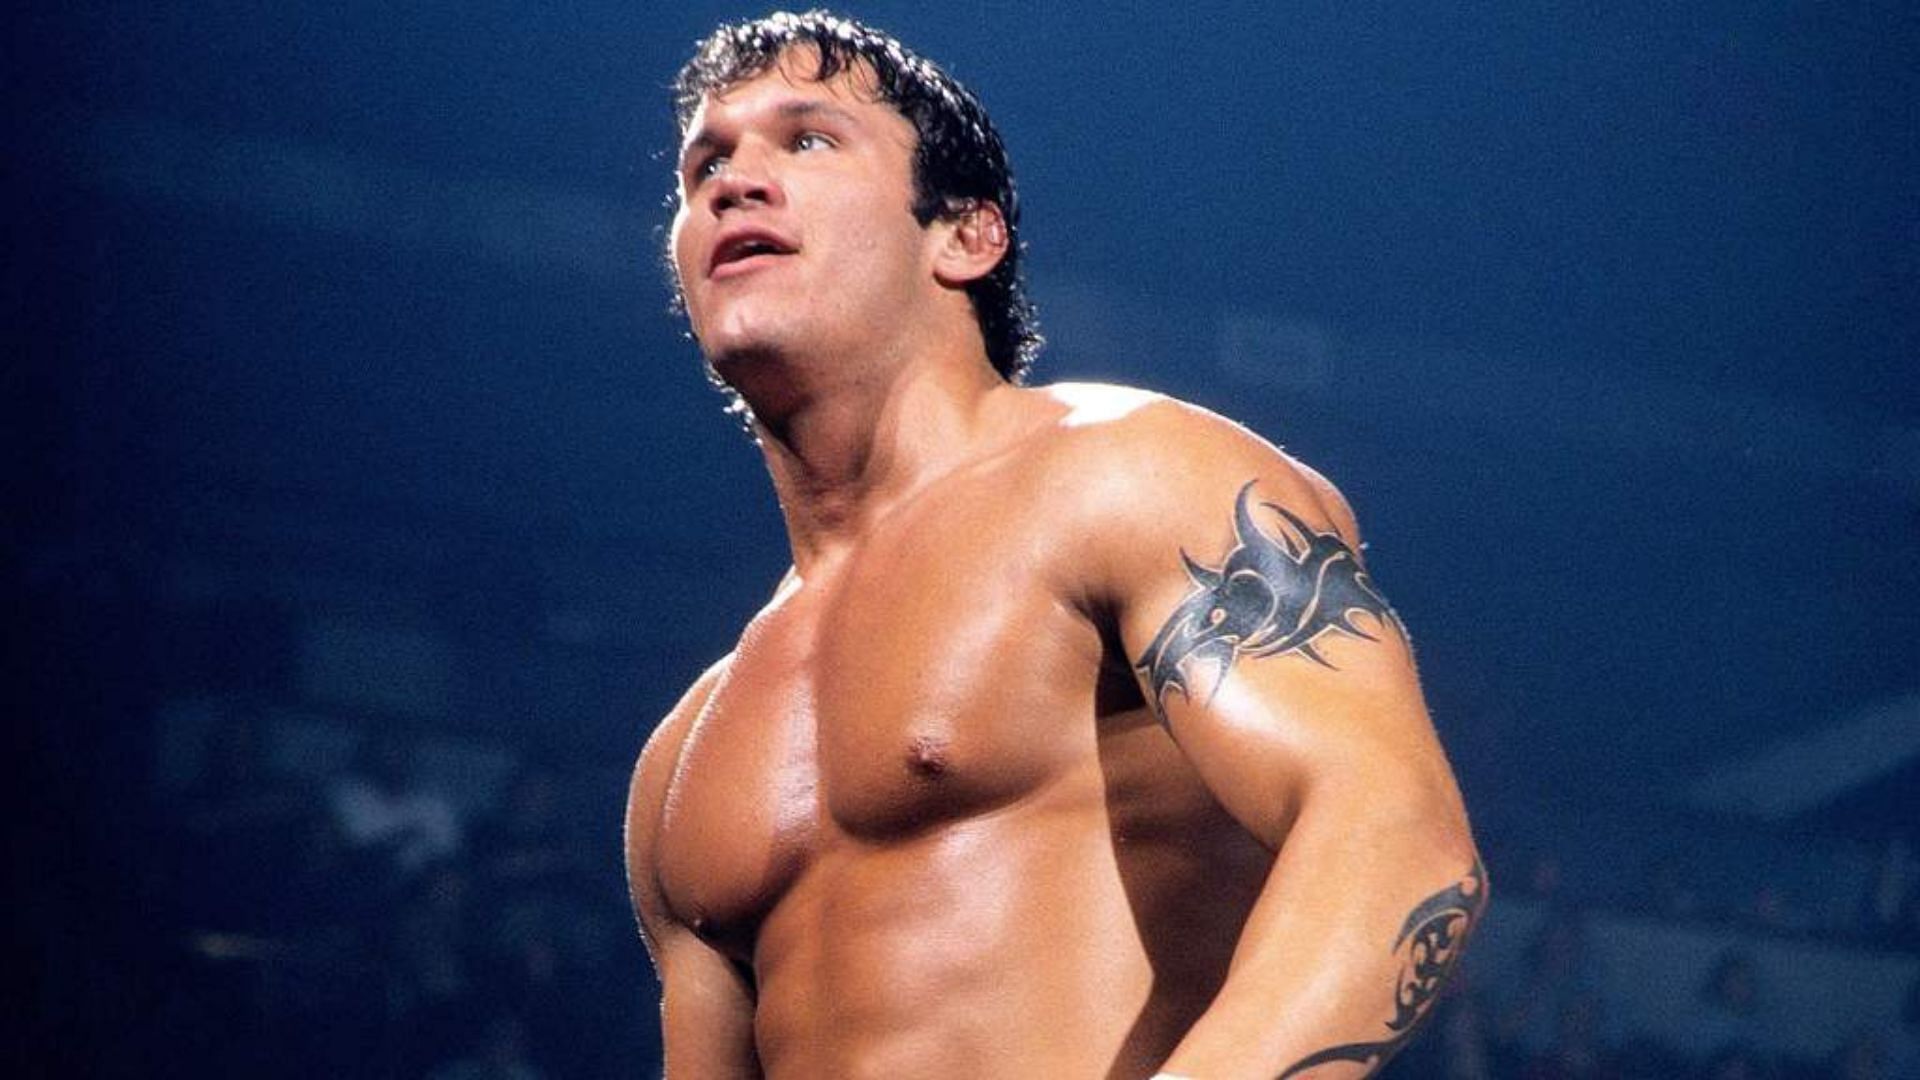 Randy Orton was a notable name in WWE, even when he was just beginning